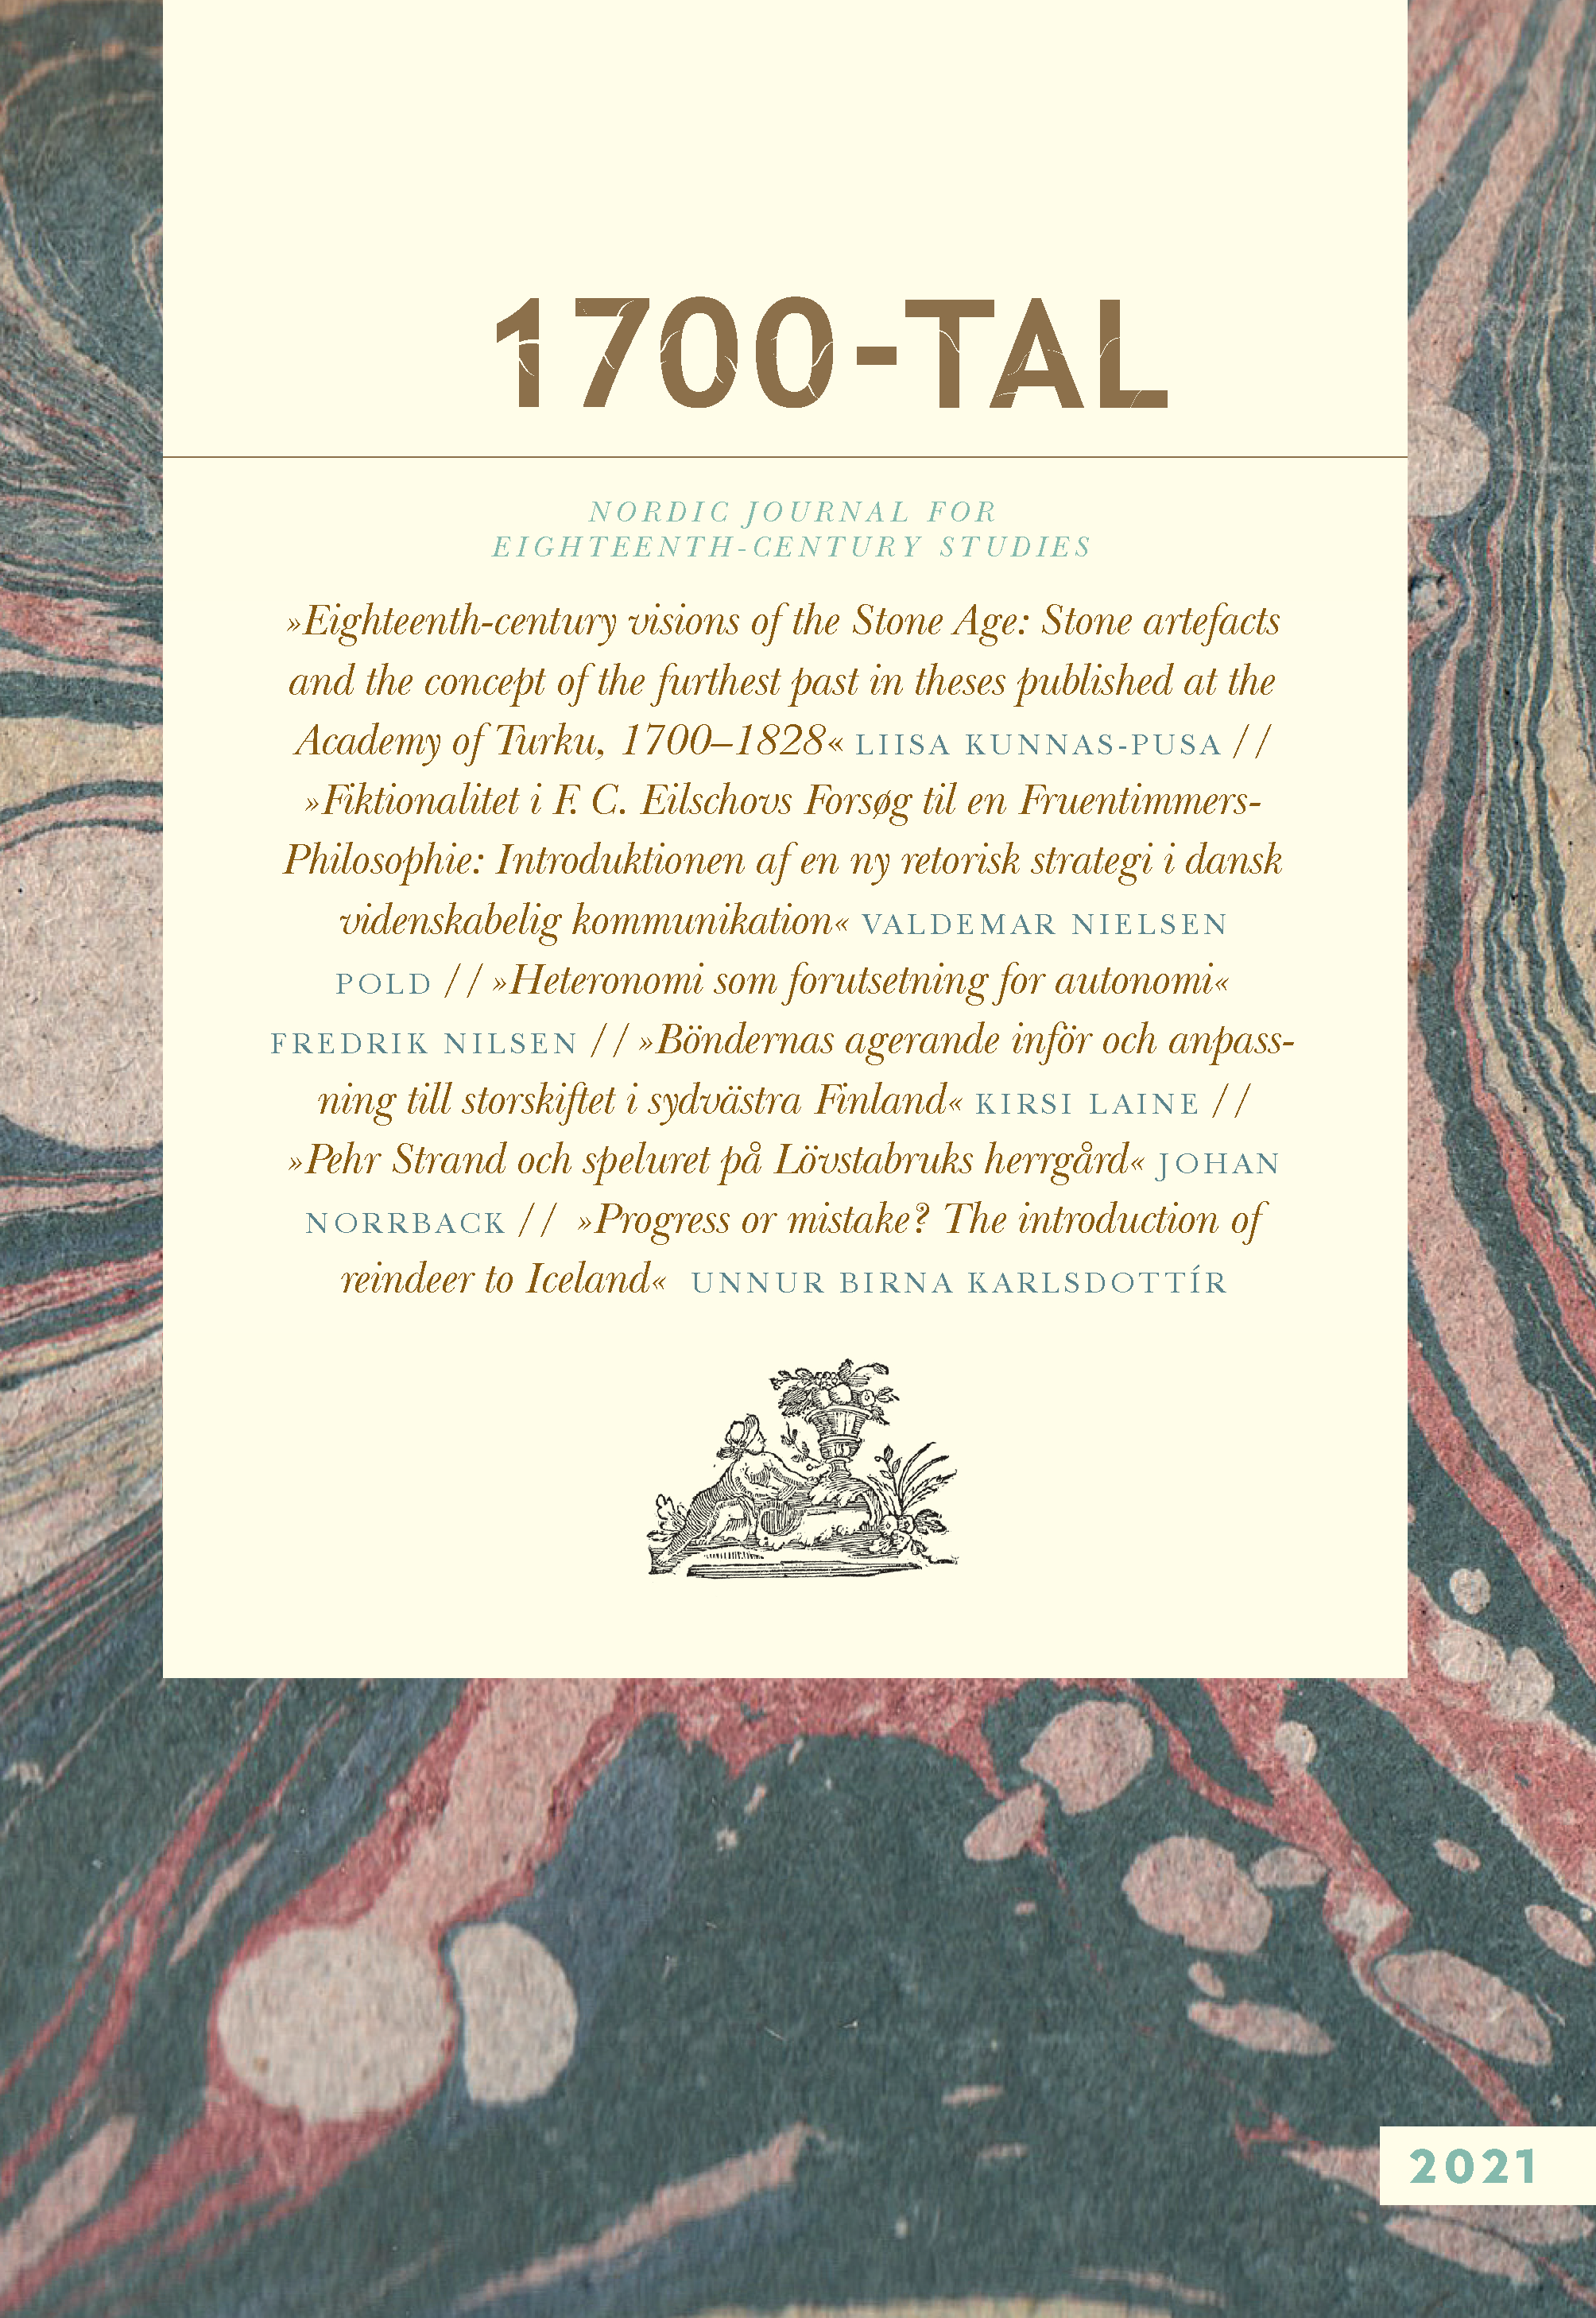 Frontcover of 1700-tal 2021.